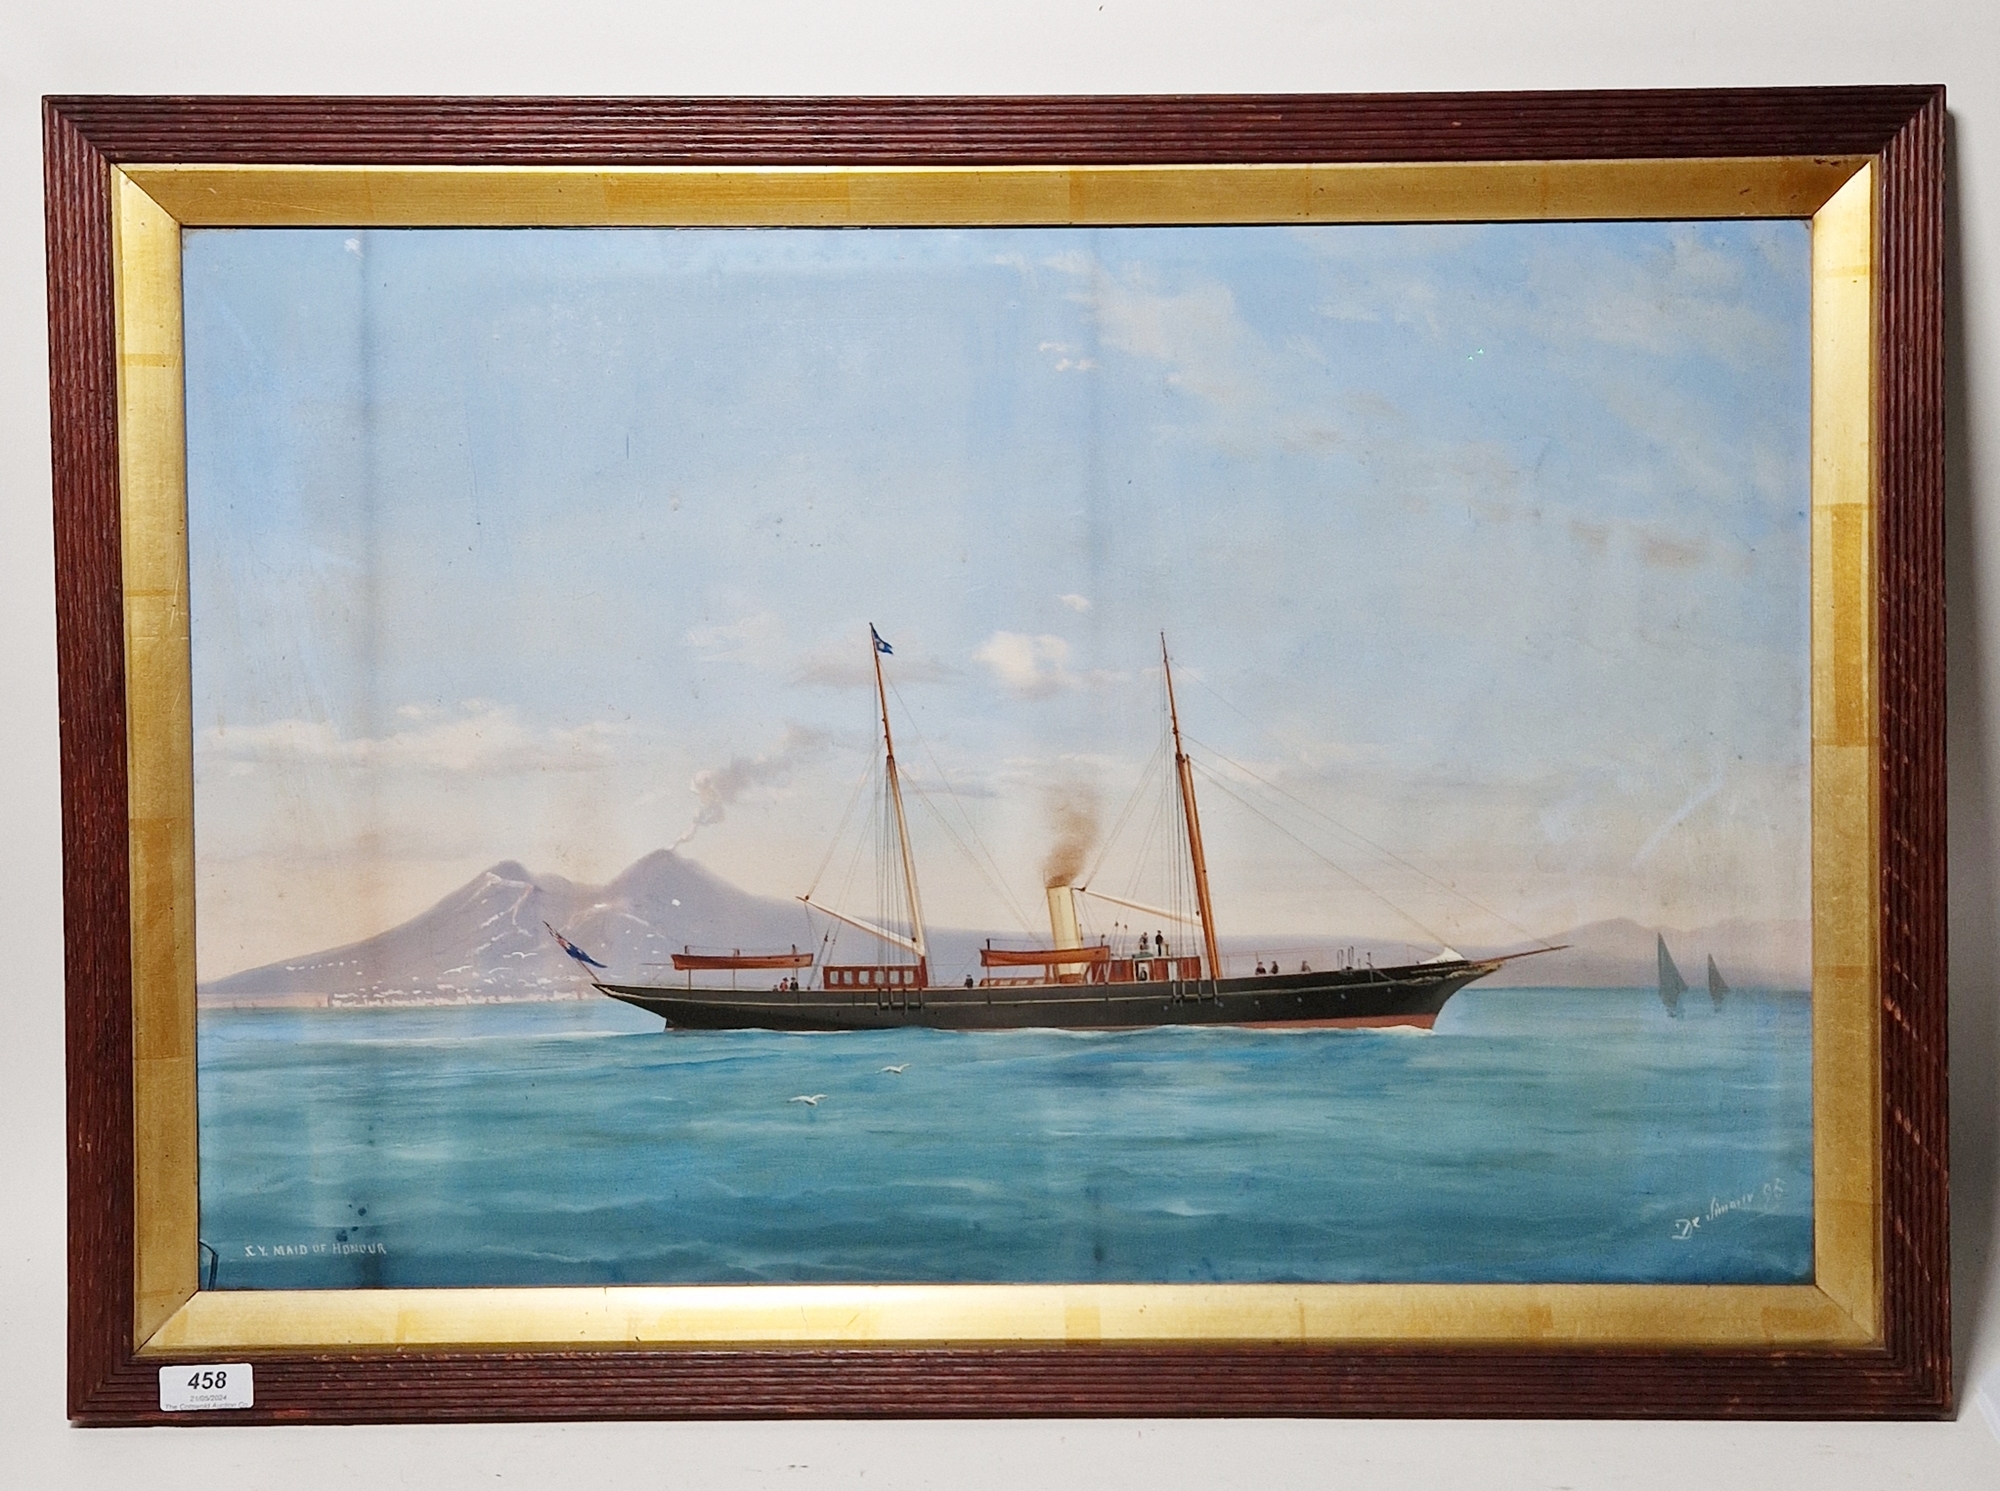 De Simone (19th/20th century) Gouache on paper The S.Y. Maid of Honour, titled and signed, 41 cm x - Image 6 of 8